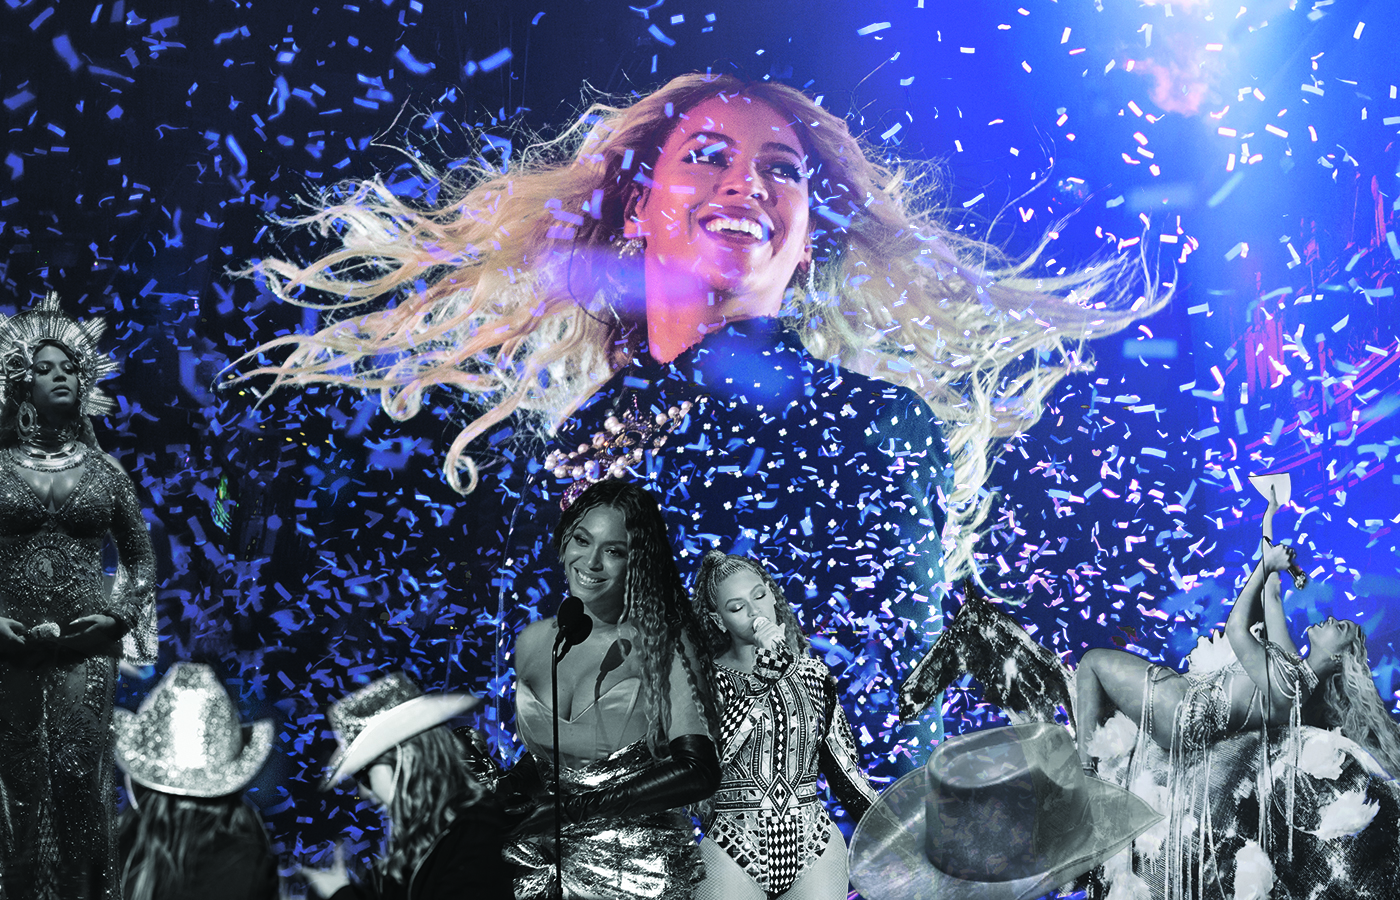 What Will Beyonce's 'Formation' Tour Outfits Look Like? They're Likely To  Be Bedazzled